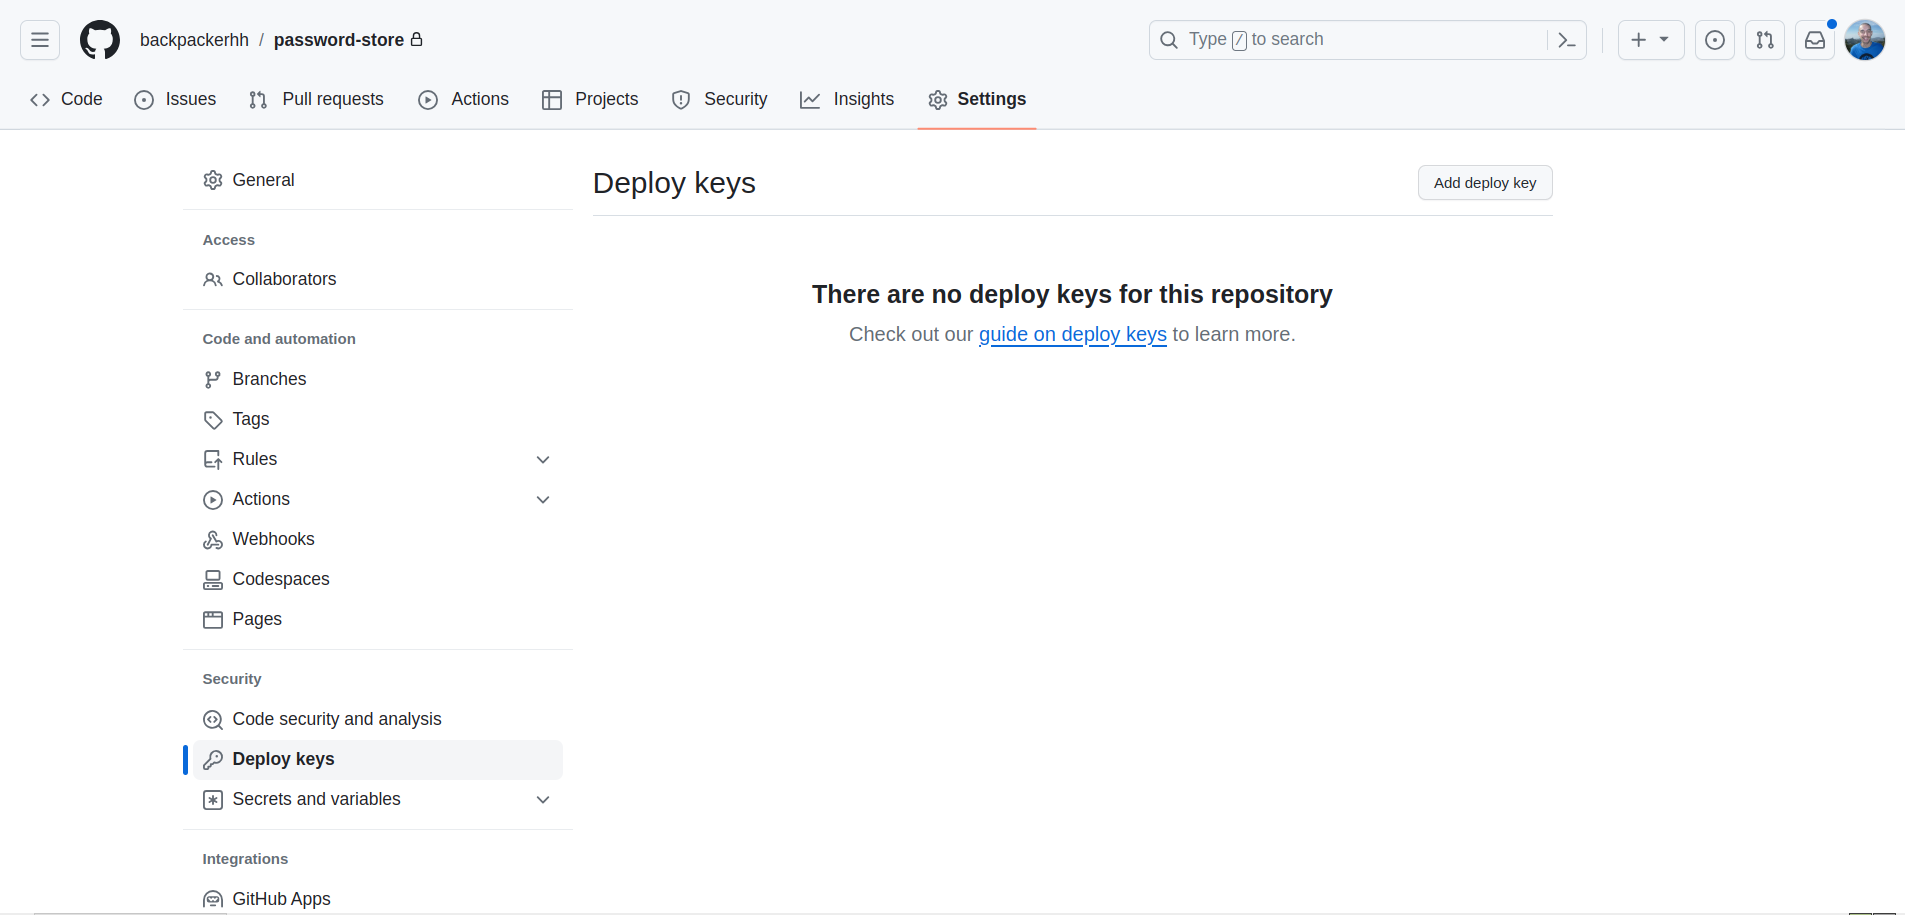 List of deploy keys for remote repository on GitHub (currently none)